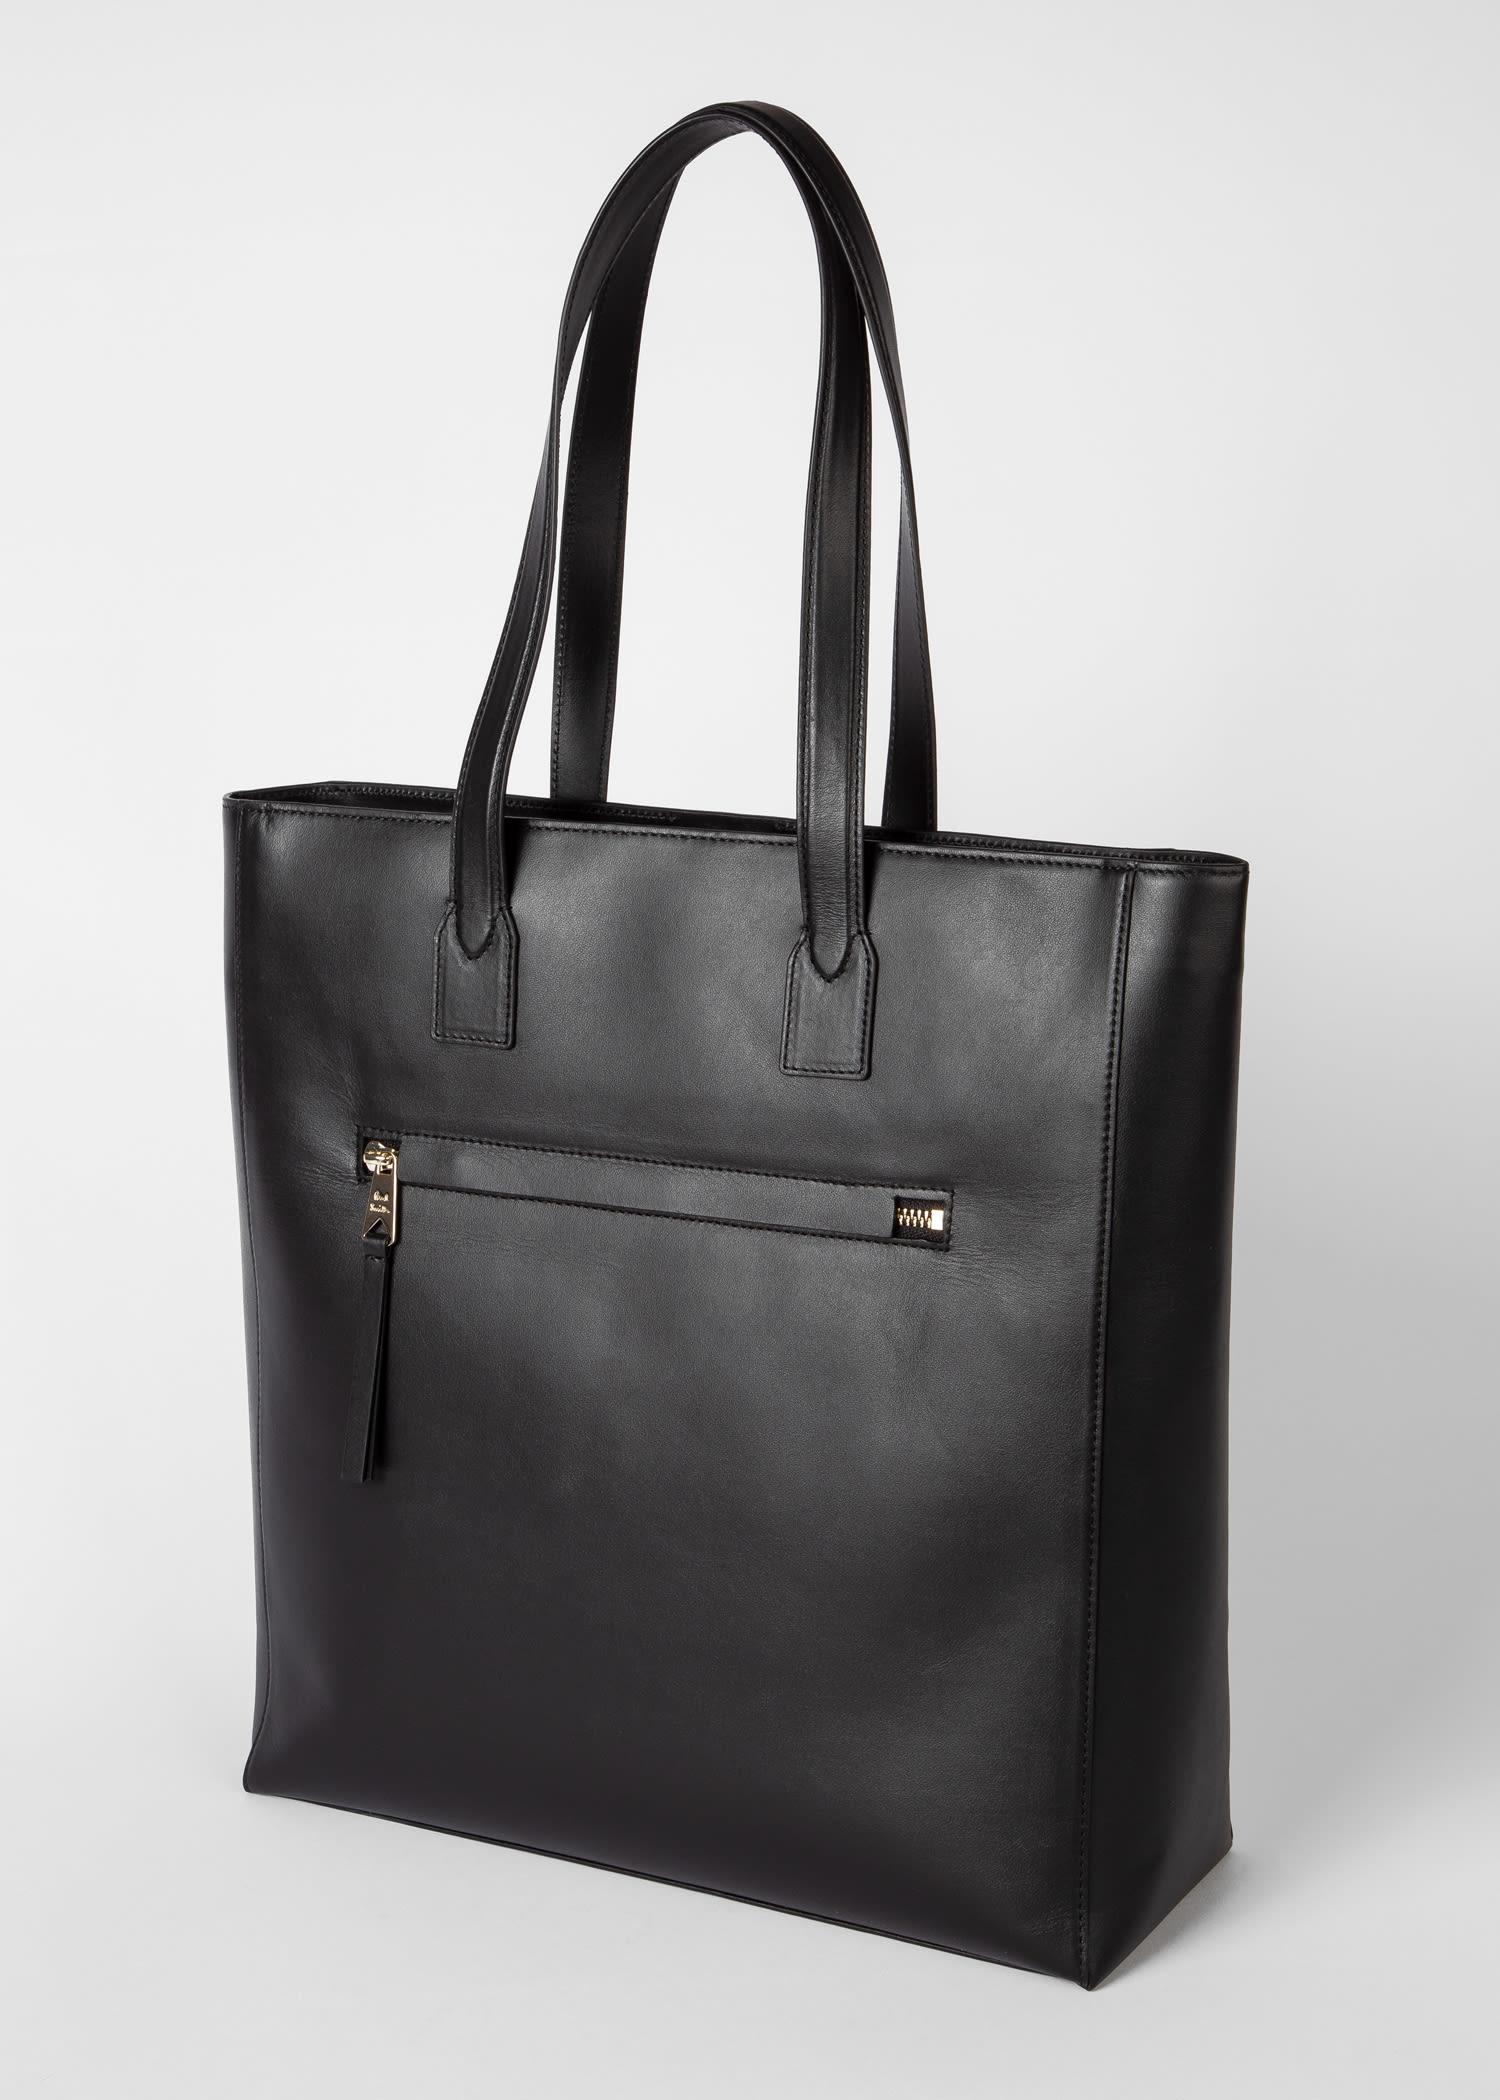 Paul Smith Black Leather 'painted Stripe' Rectangular Tote Bag | Lyst